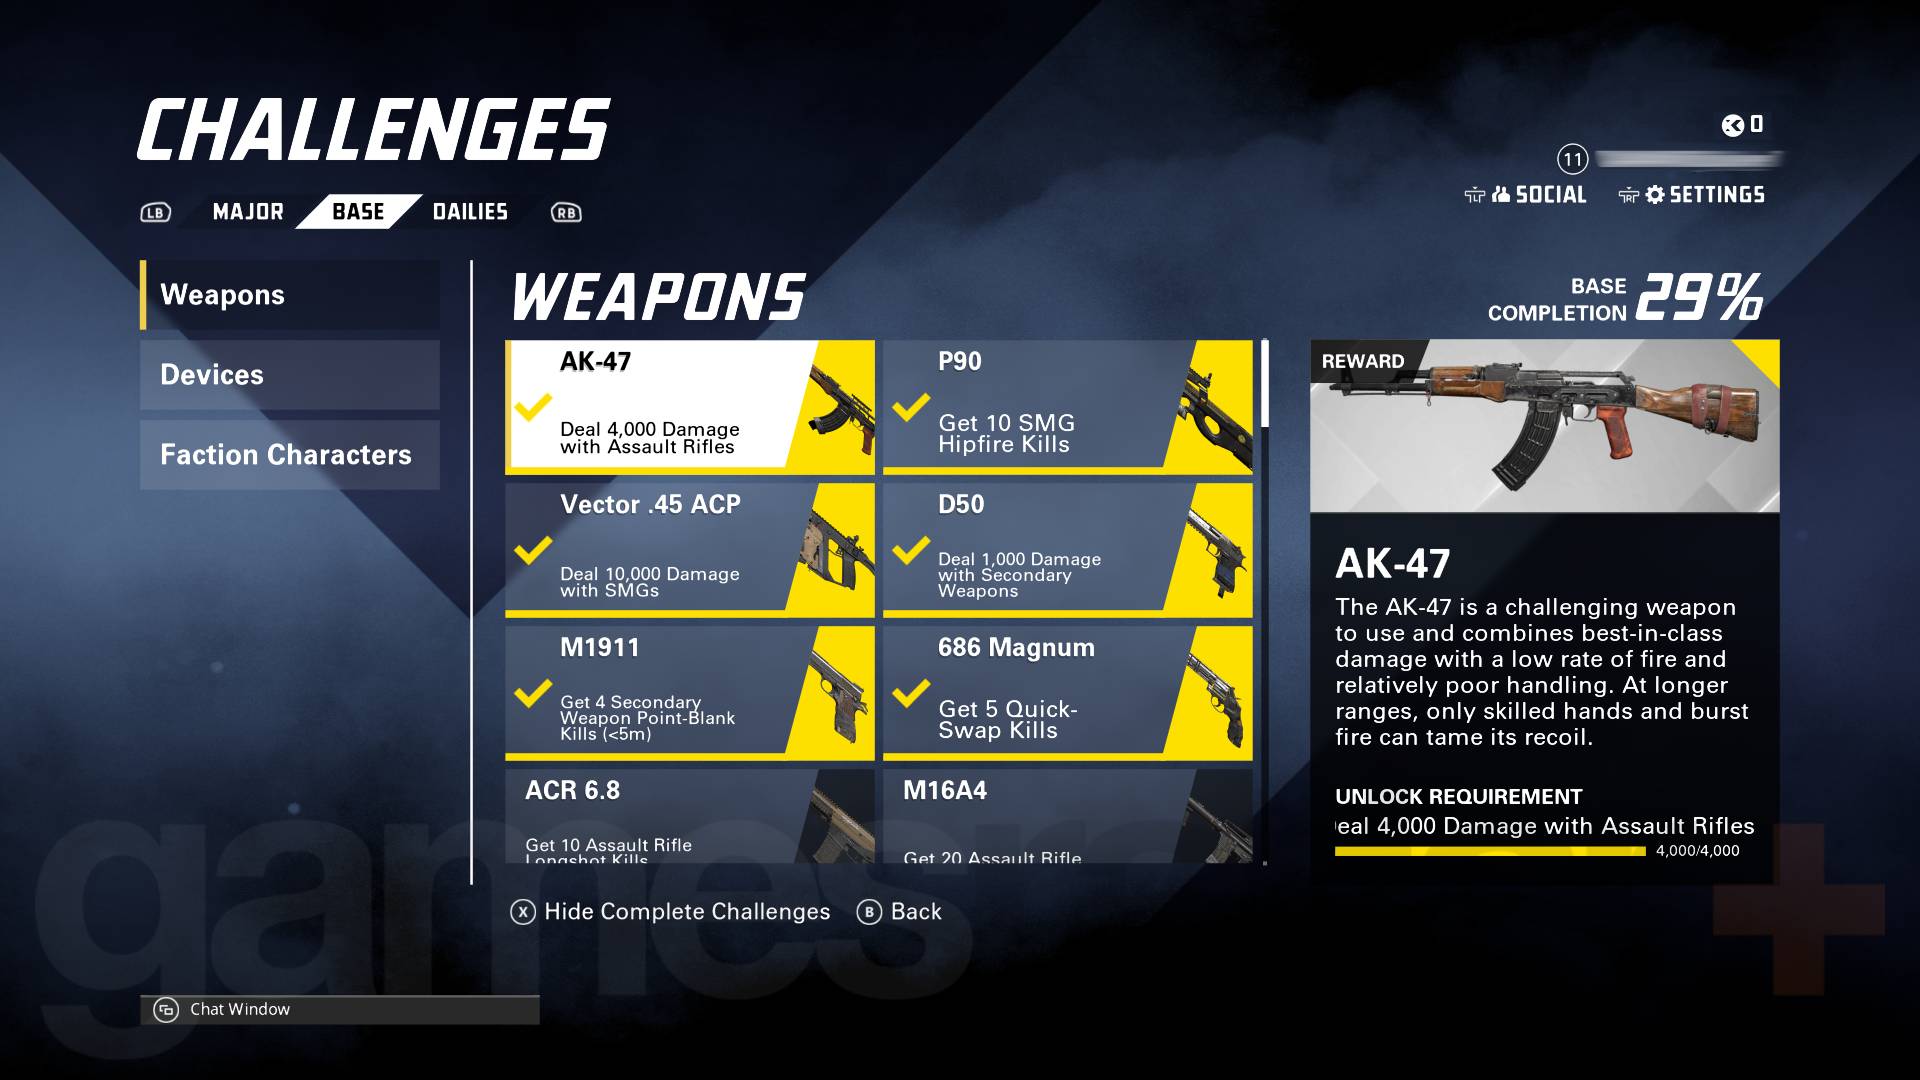 XDefiant weapon challenges for unlocks